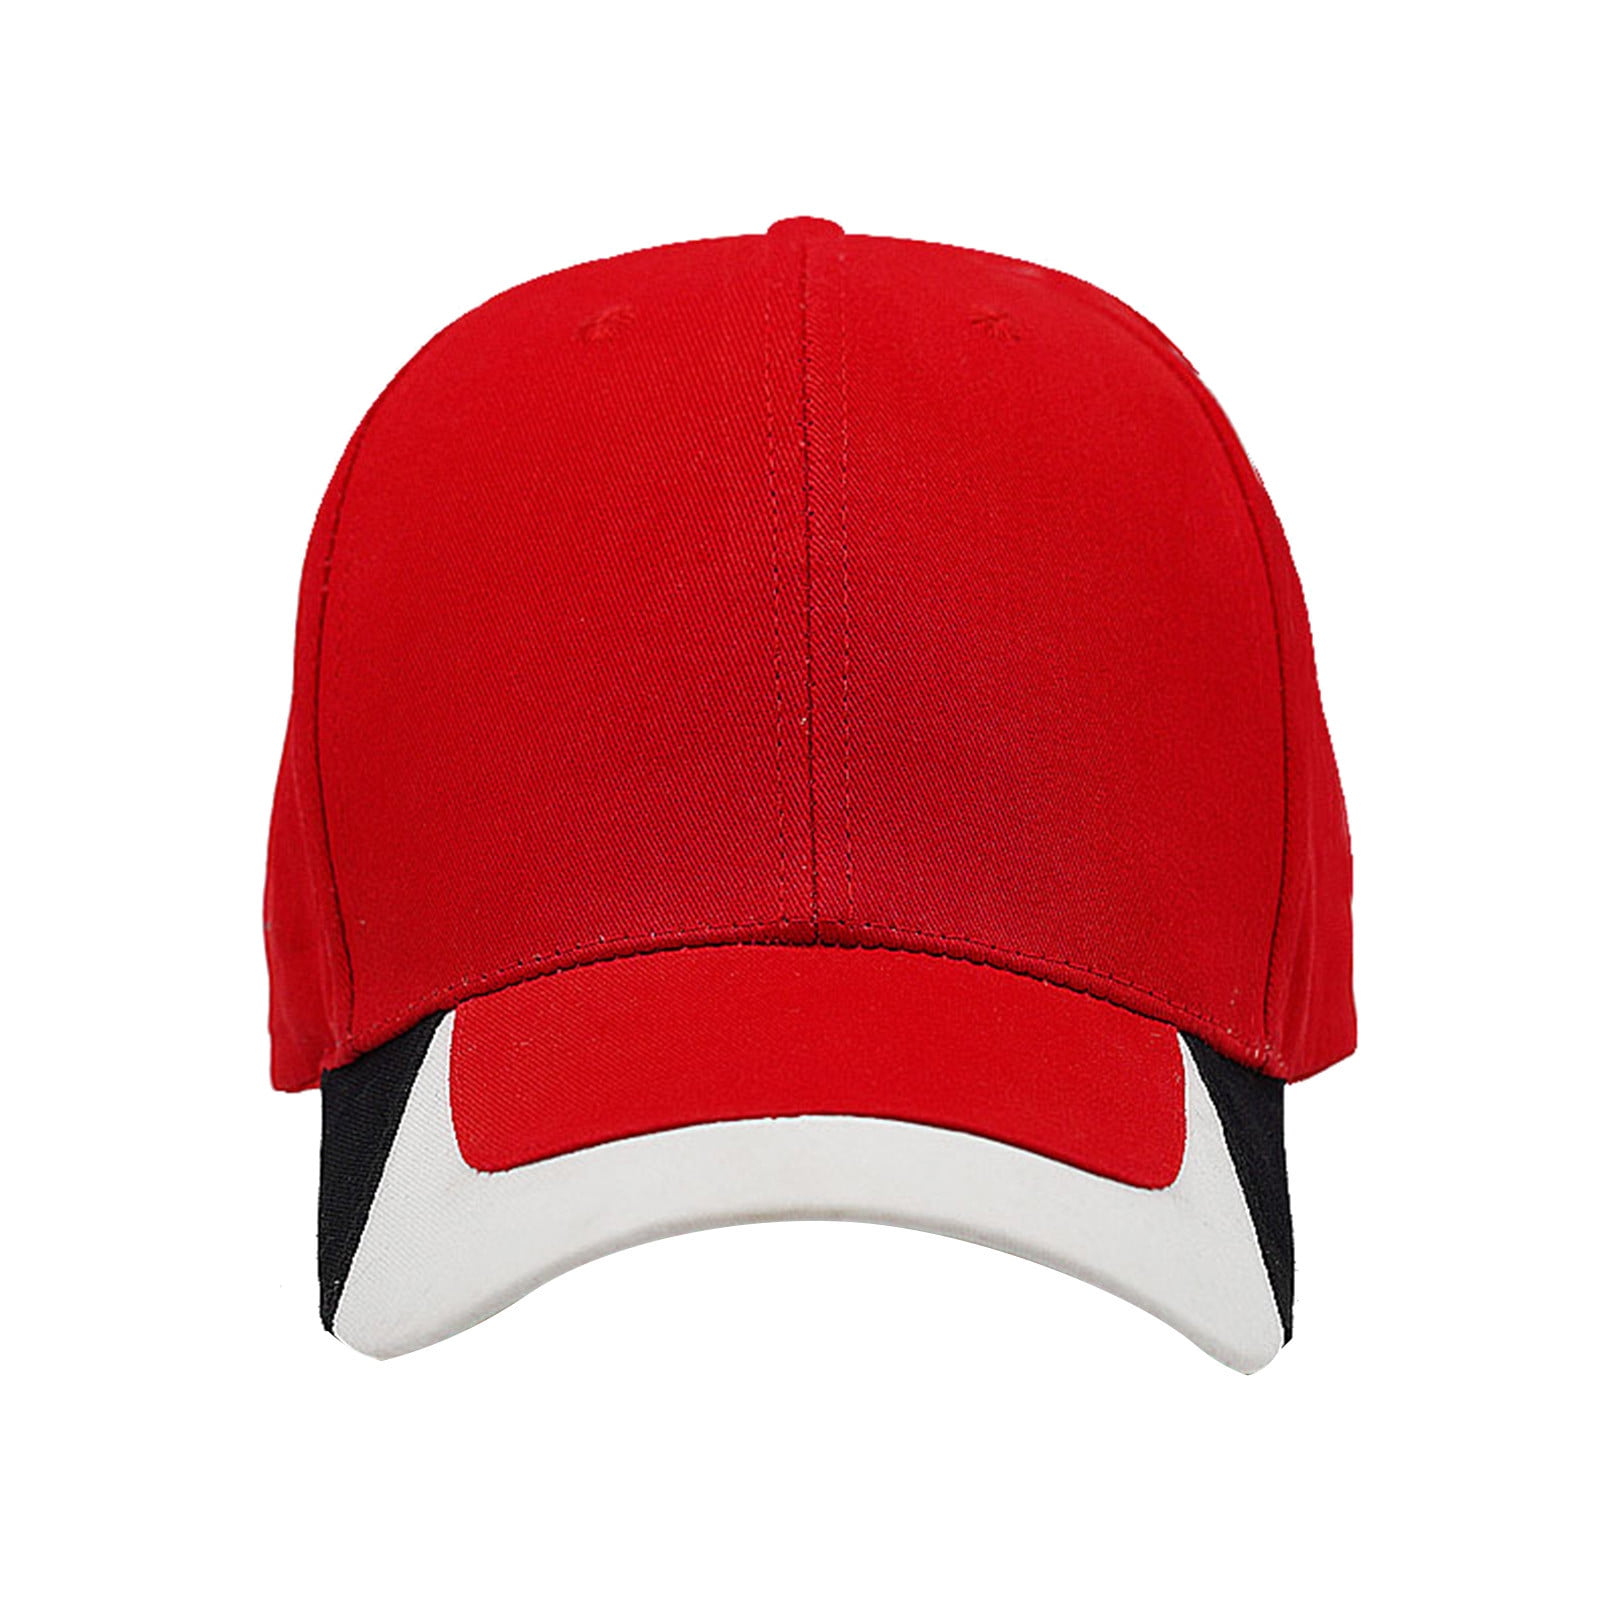 NKOOGH Shade Hat Independent Trucks Hats for Men Mens And Womens Summer  Fashion Casual Sunscreen Baseball Capss Caps Hats